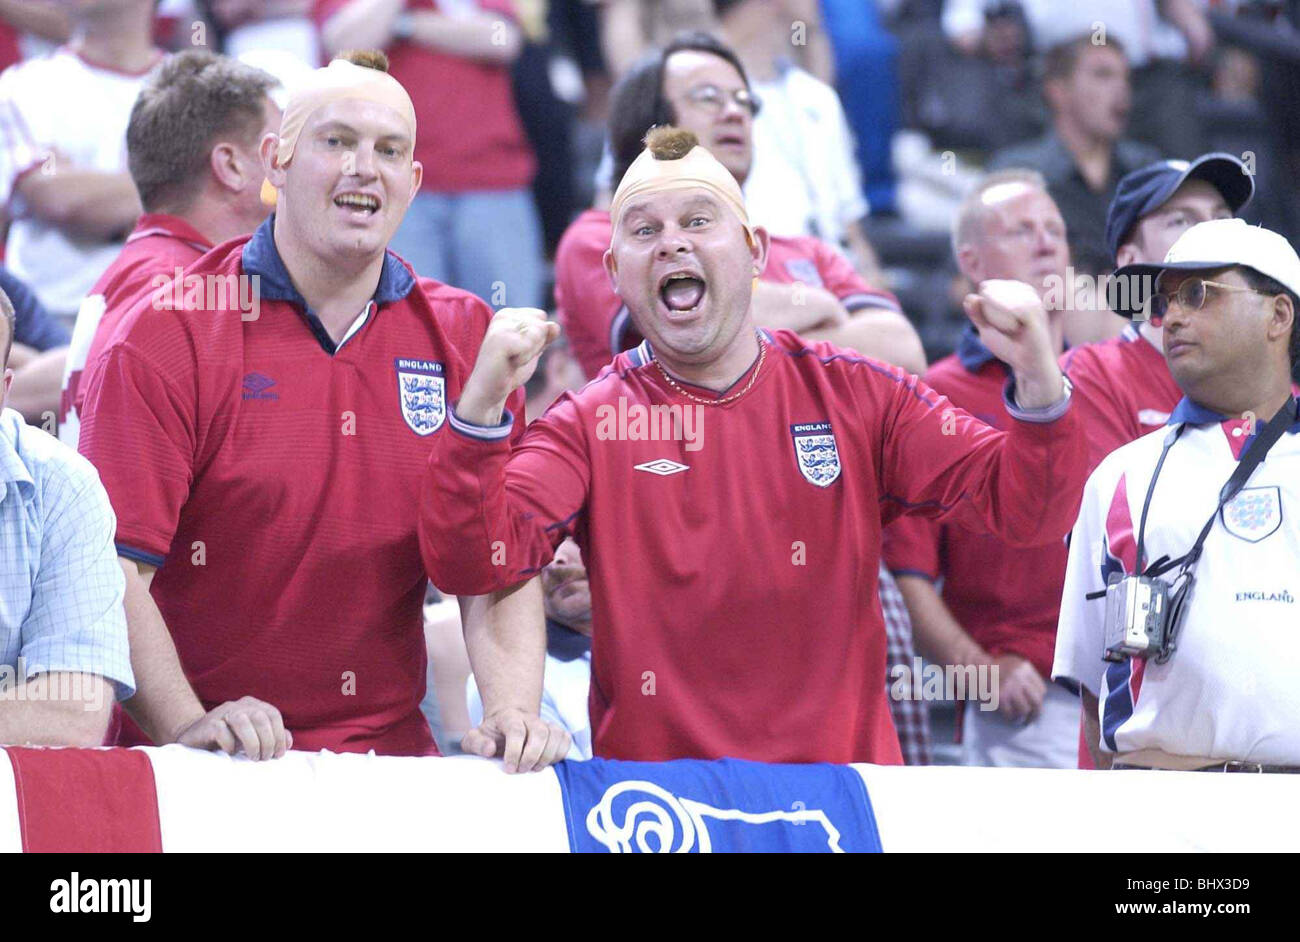 England Football Fans Supporters June 2002 Pictured celebrating after win against Argentina Stock Photo